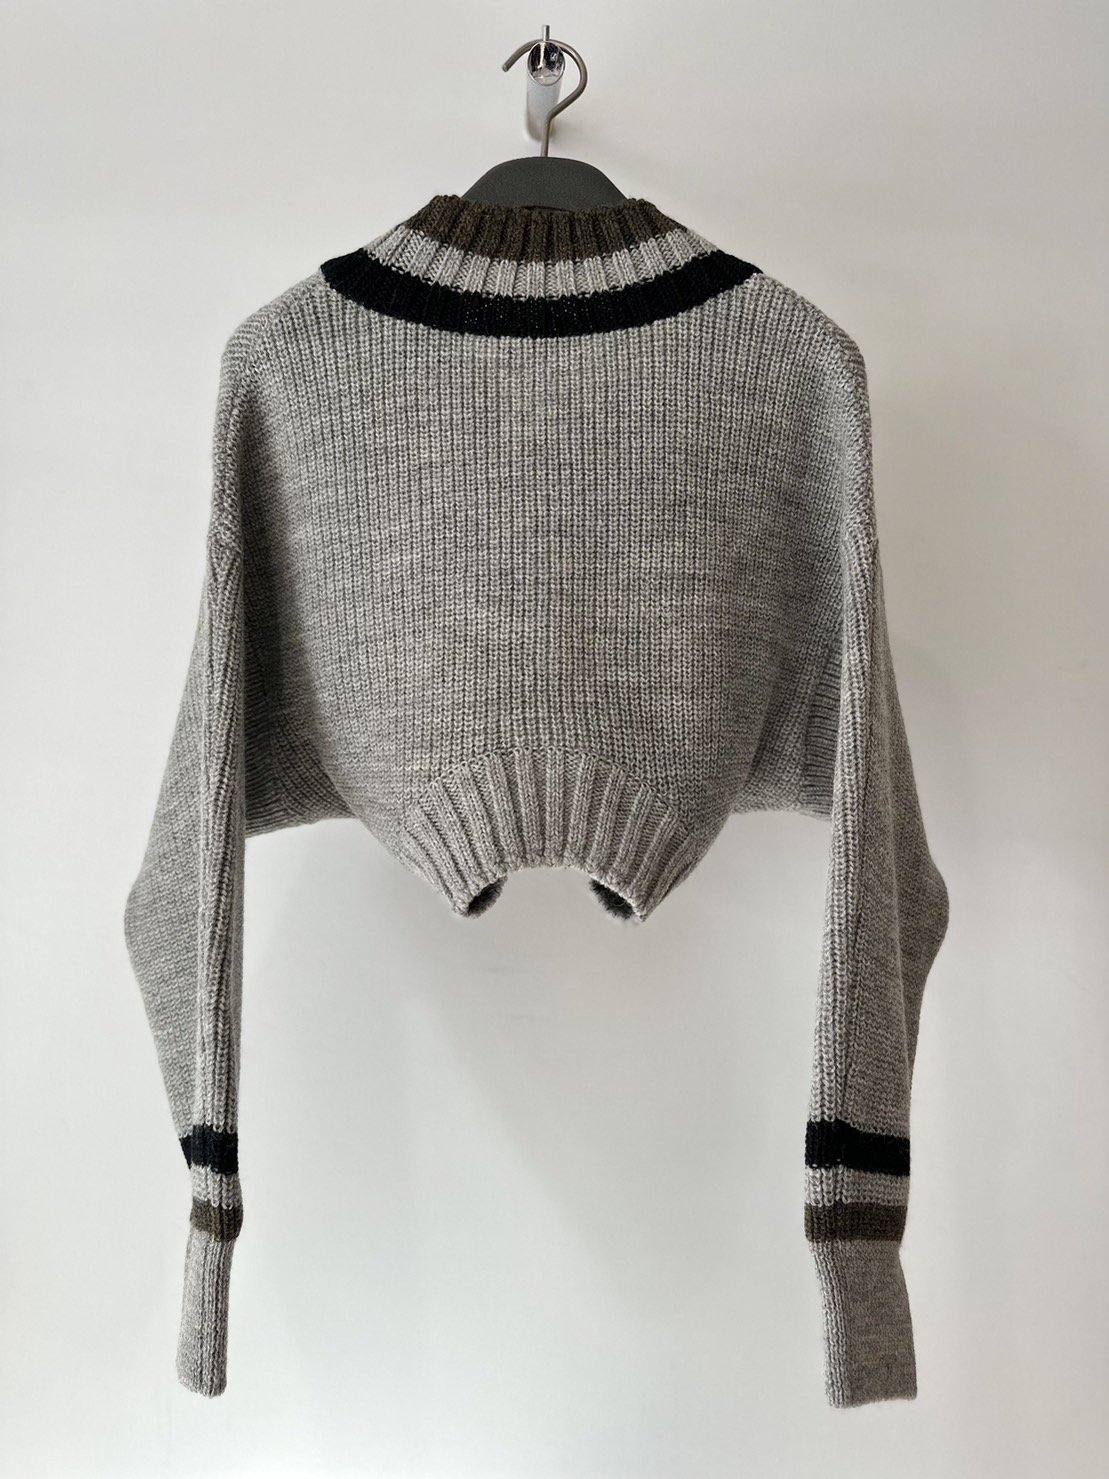 soduk<br />up side down knit top / gray<img class='new_mark_img2' src='https://img.shop-pro.jp/img/new/icons14.gif' style='border:none;display:inline;margin:0px;padding:0px;width:auto;' />